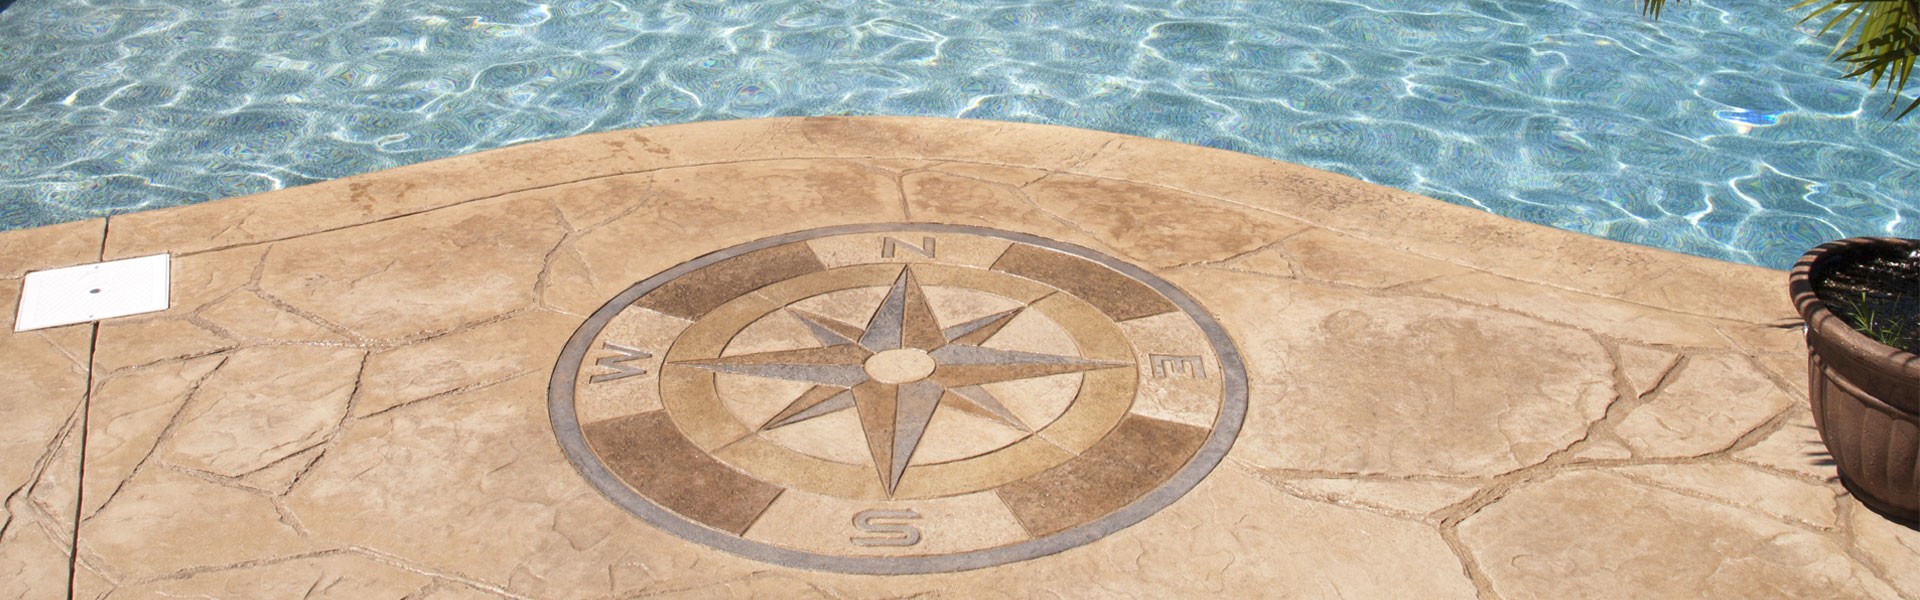 Compass made out of concrete near a pool.